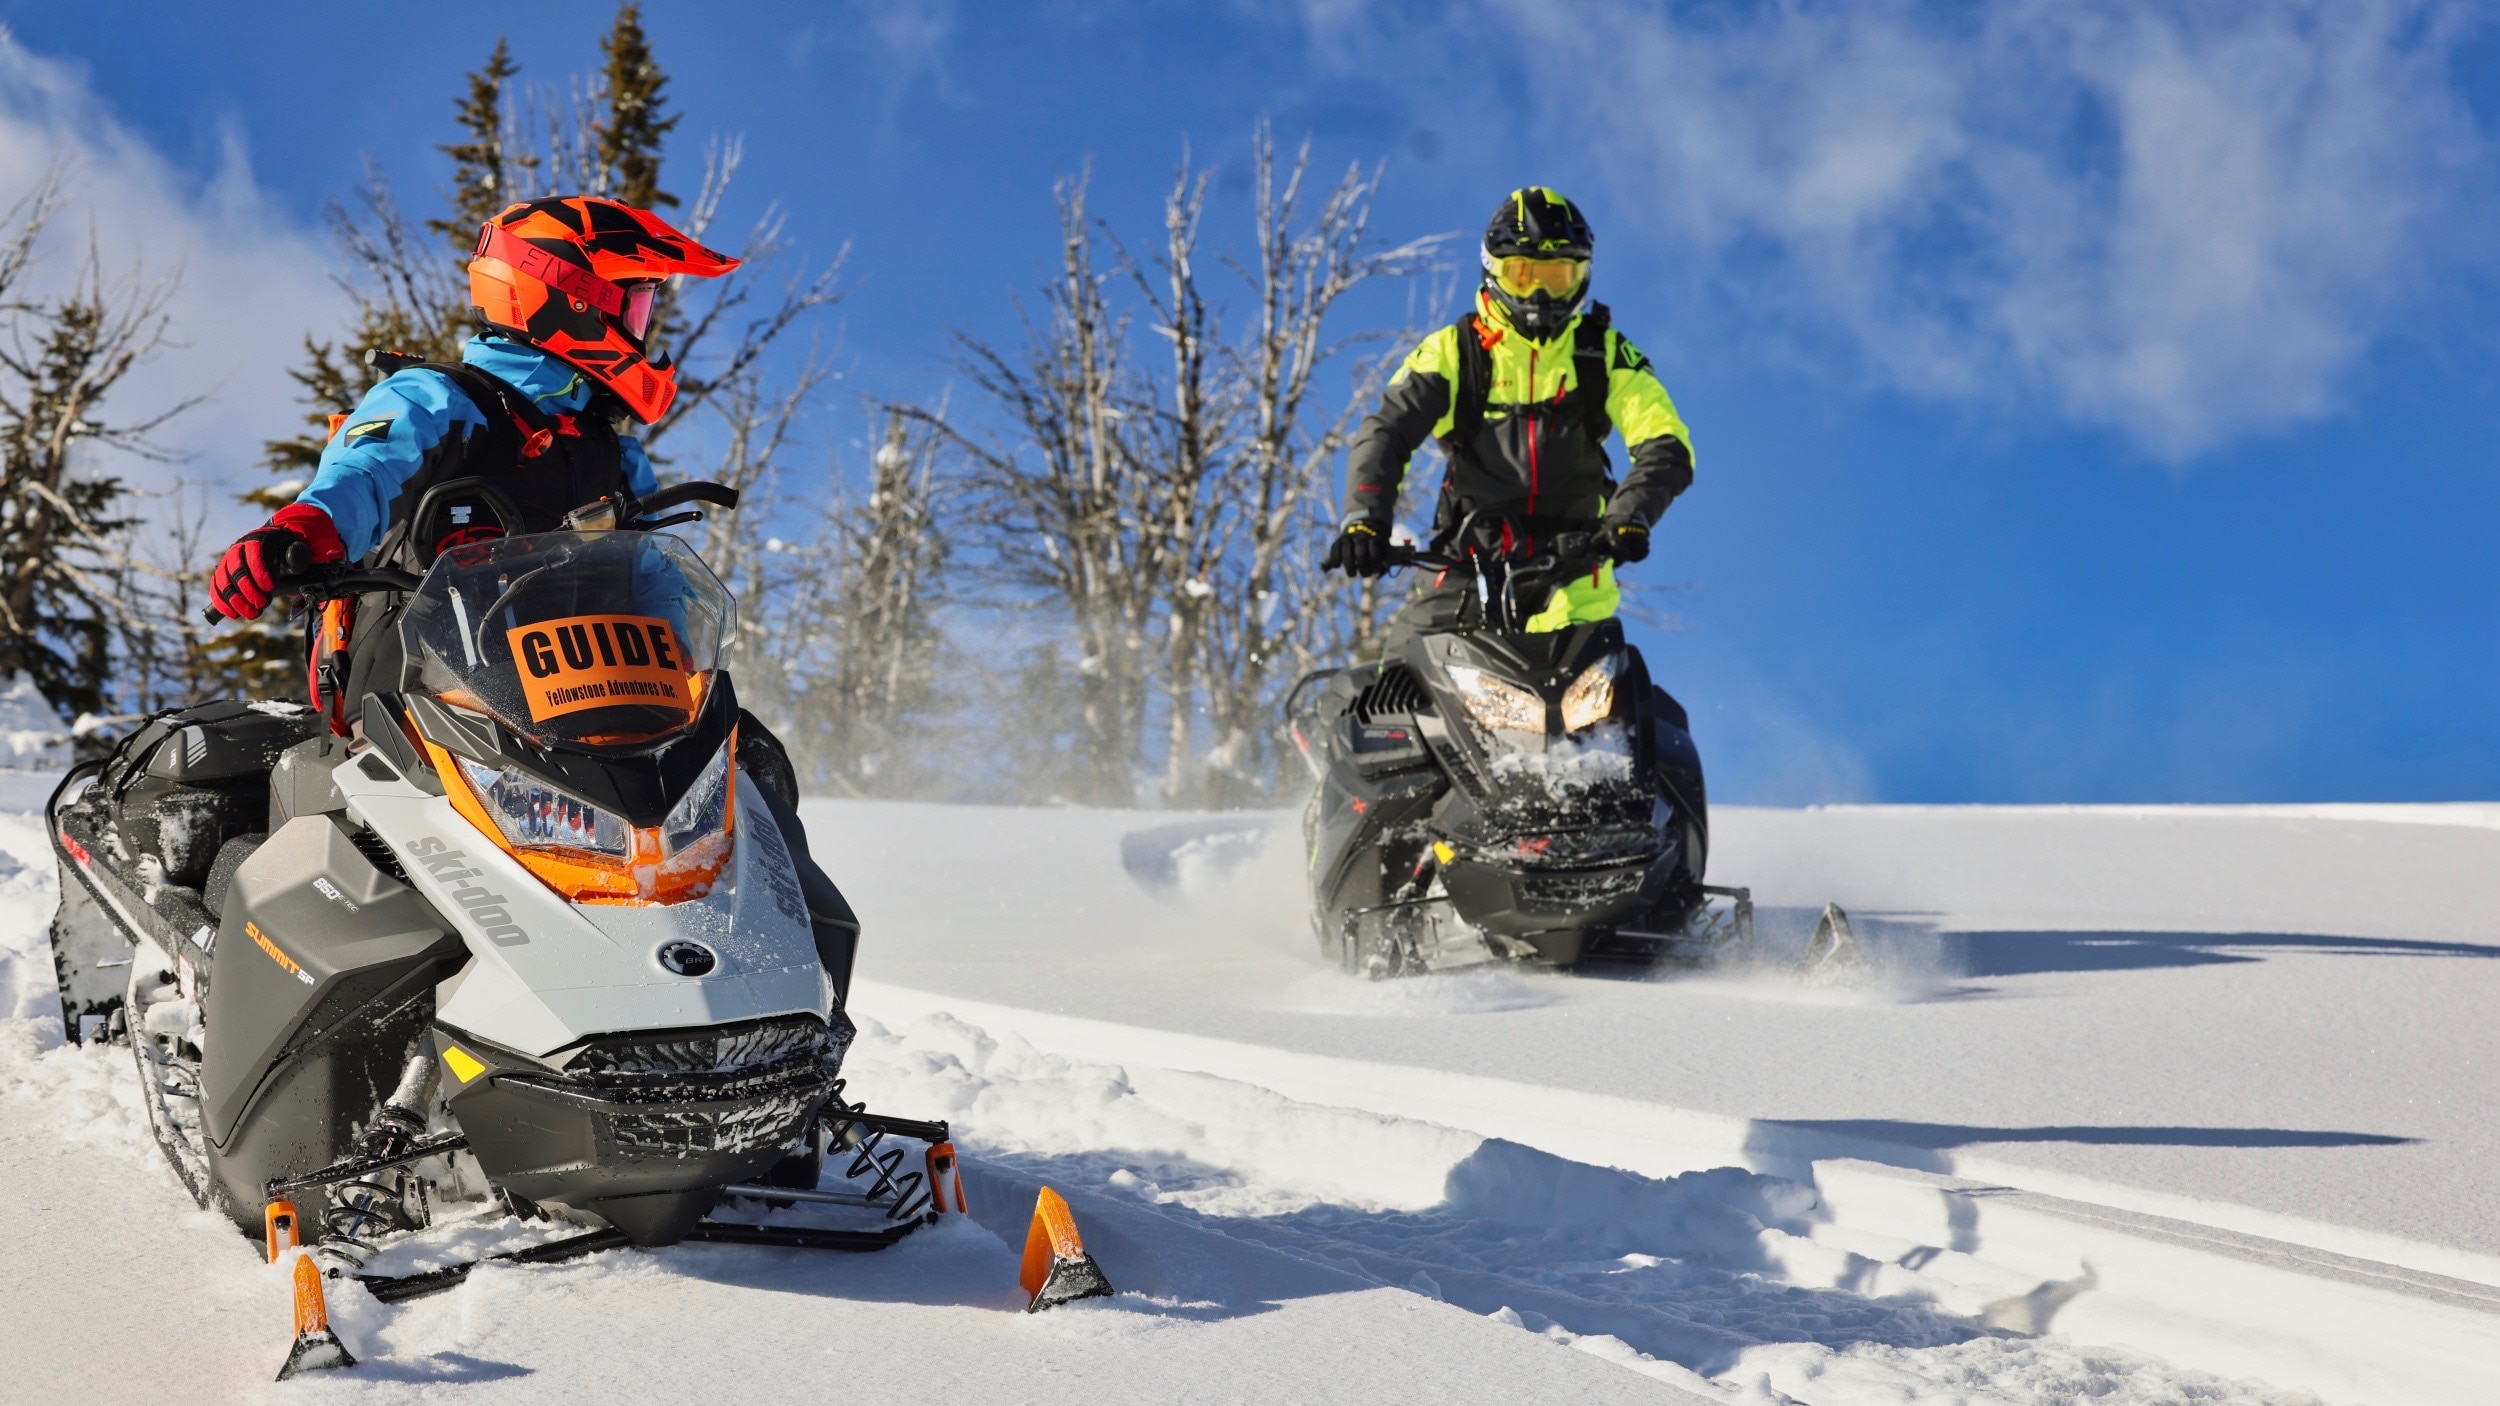 guided ski-doo ride with two drivers